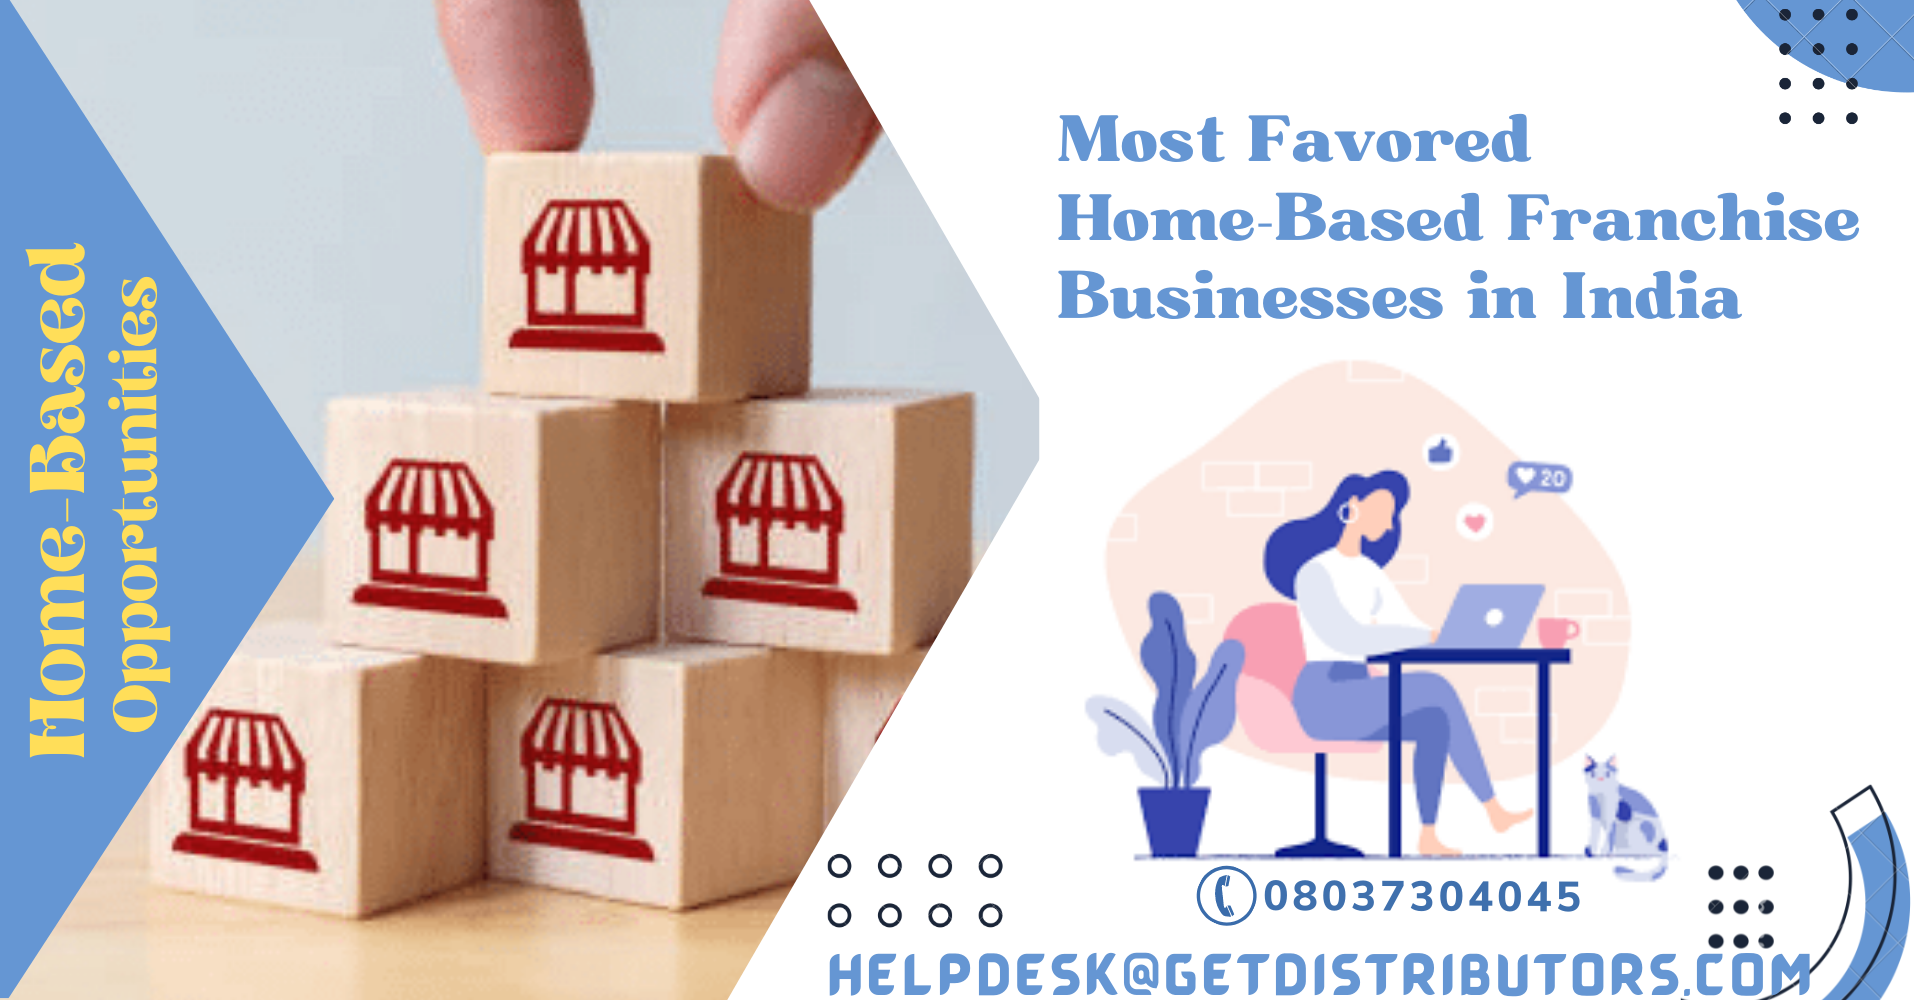 Most Favored Home-Based Franchise Businesses in India